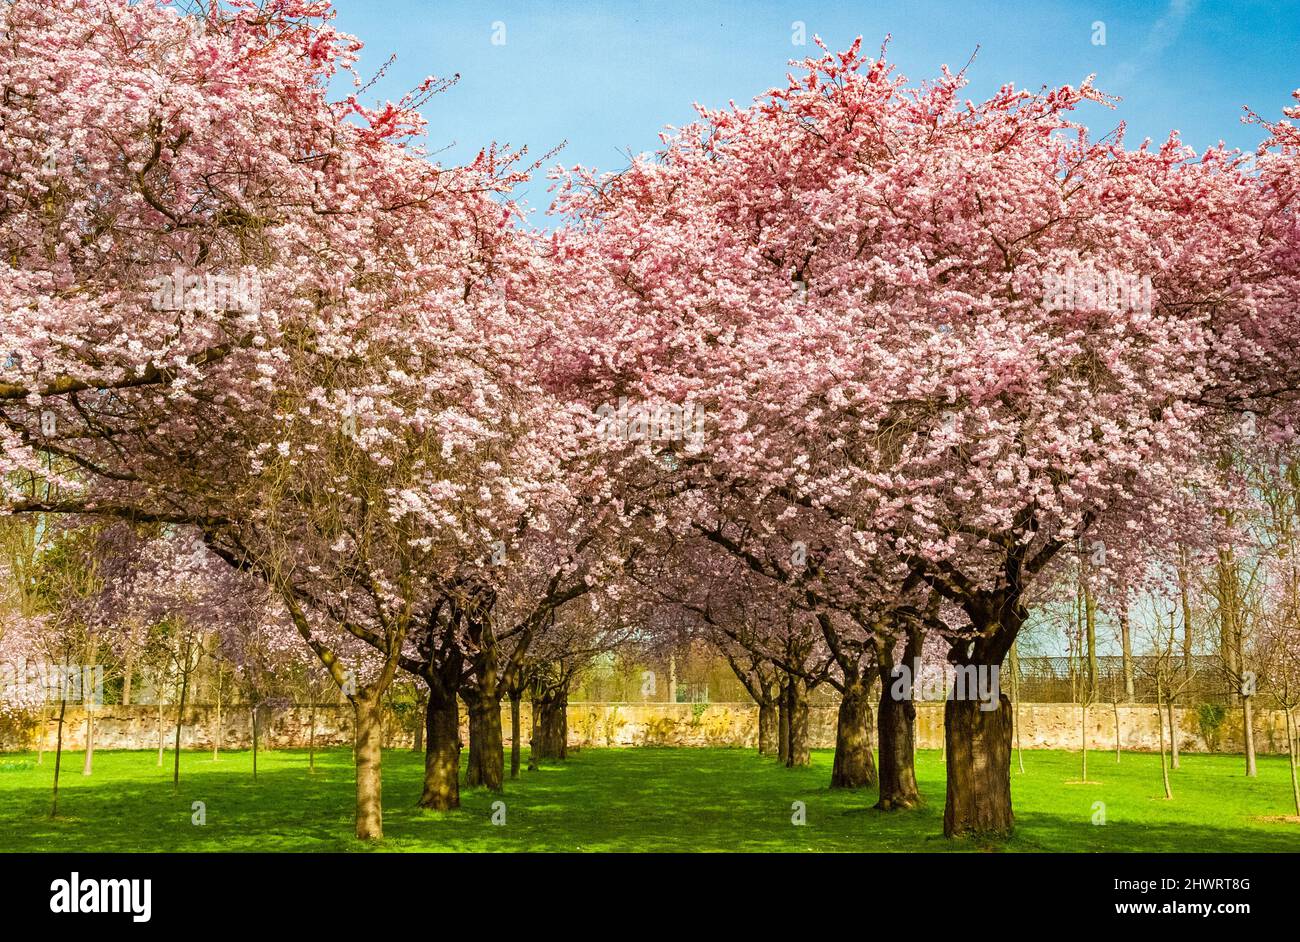 Beautiful view of an avenue of blooming Japanese ornamental cherry trees (Prunus serrulata) in the famous garden of the Schwetzingen Palace in Germany. Stock Photo